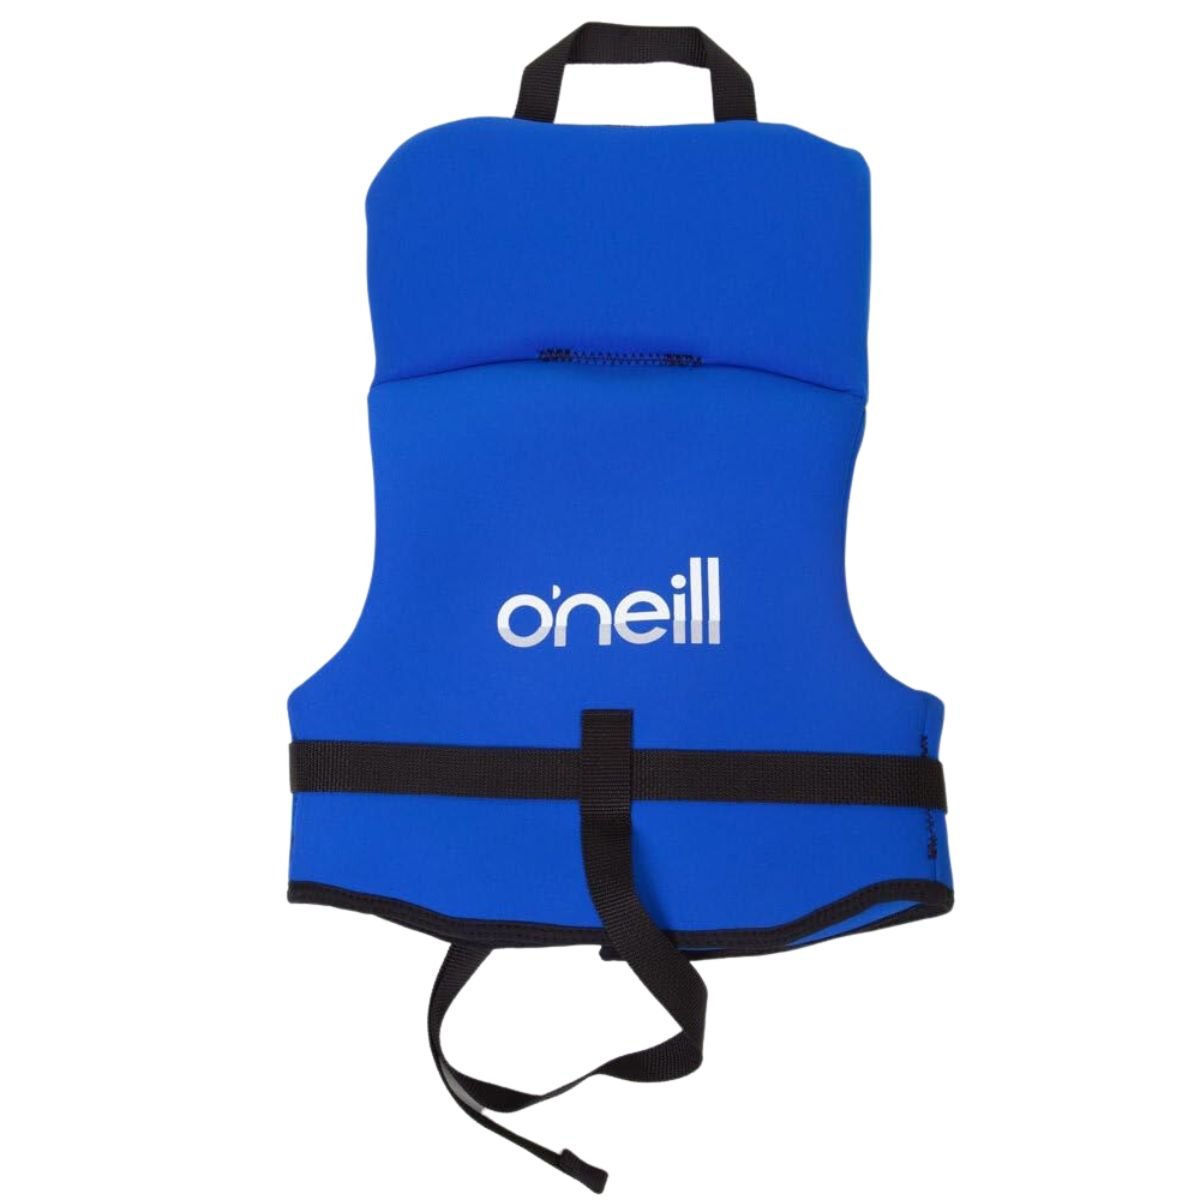 O'Neill Infant Reactor FZ USCG Life Vest in Pacific Blue/Yellow - BoardCo